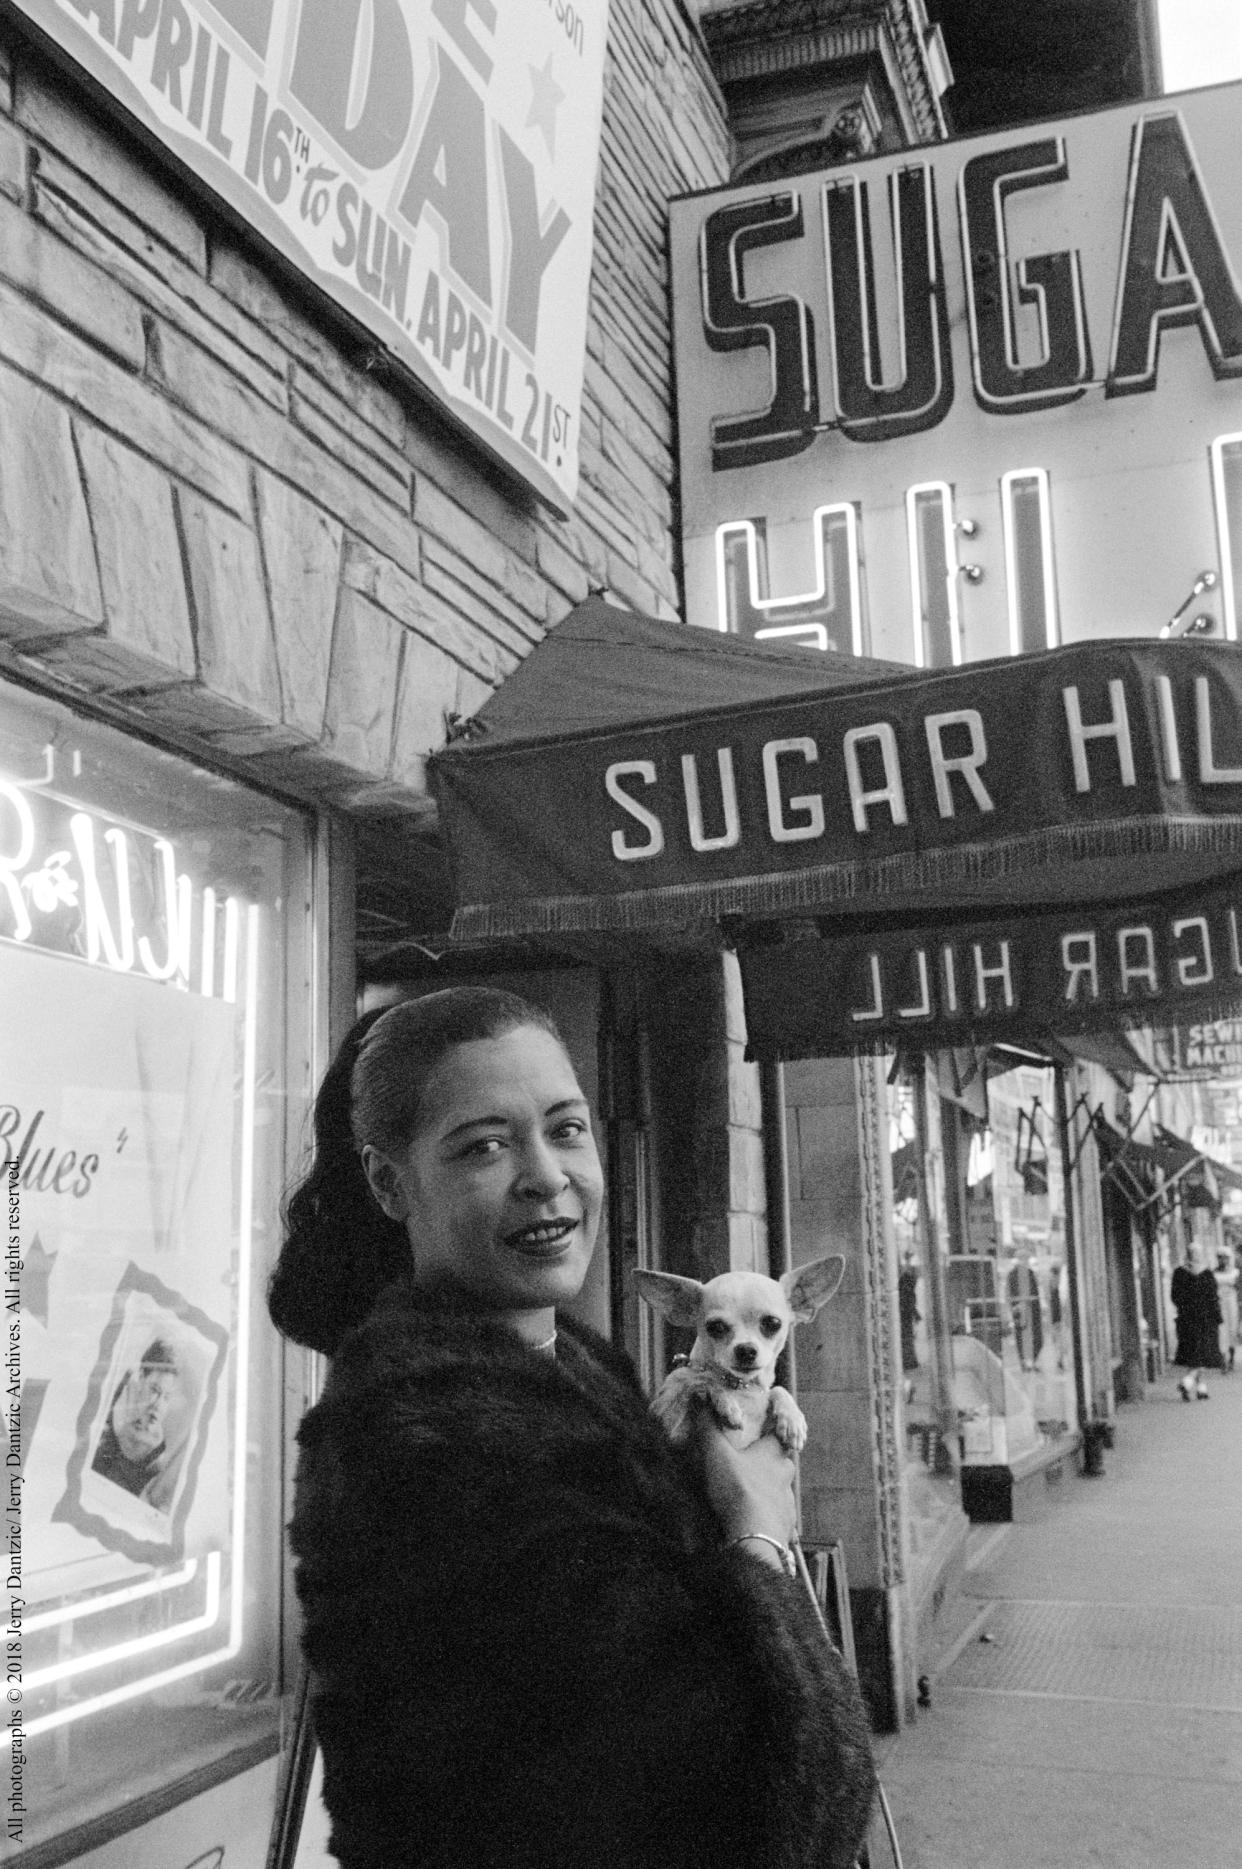 Billie Holiday  holding her pet Chihuahua in front of Sugar Hill,  Newark, New Jersey, April 18, 1957 - Credit: © 201 8 Jerry Dantzic/ Jerry Dantzic Archives